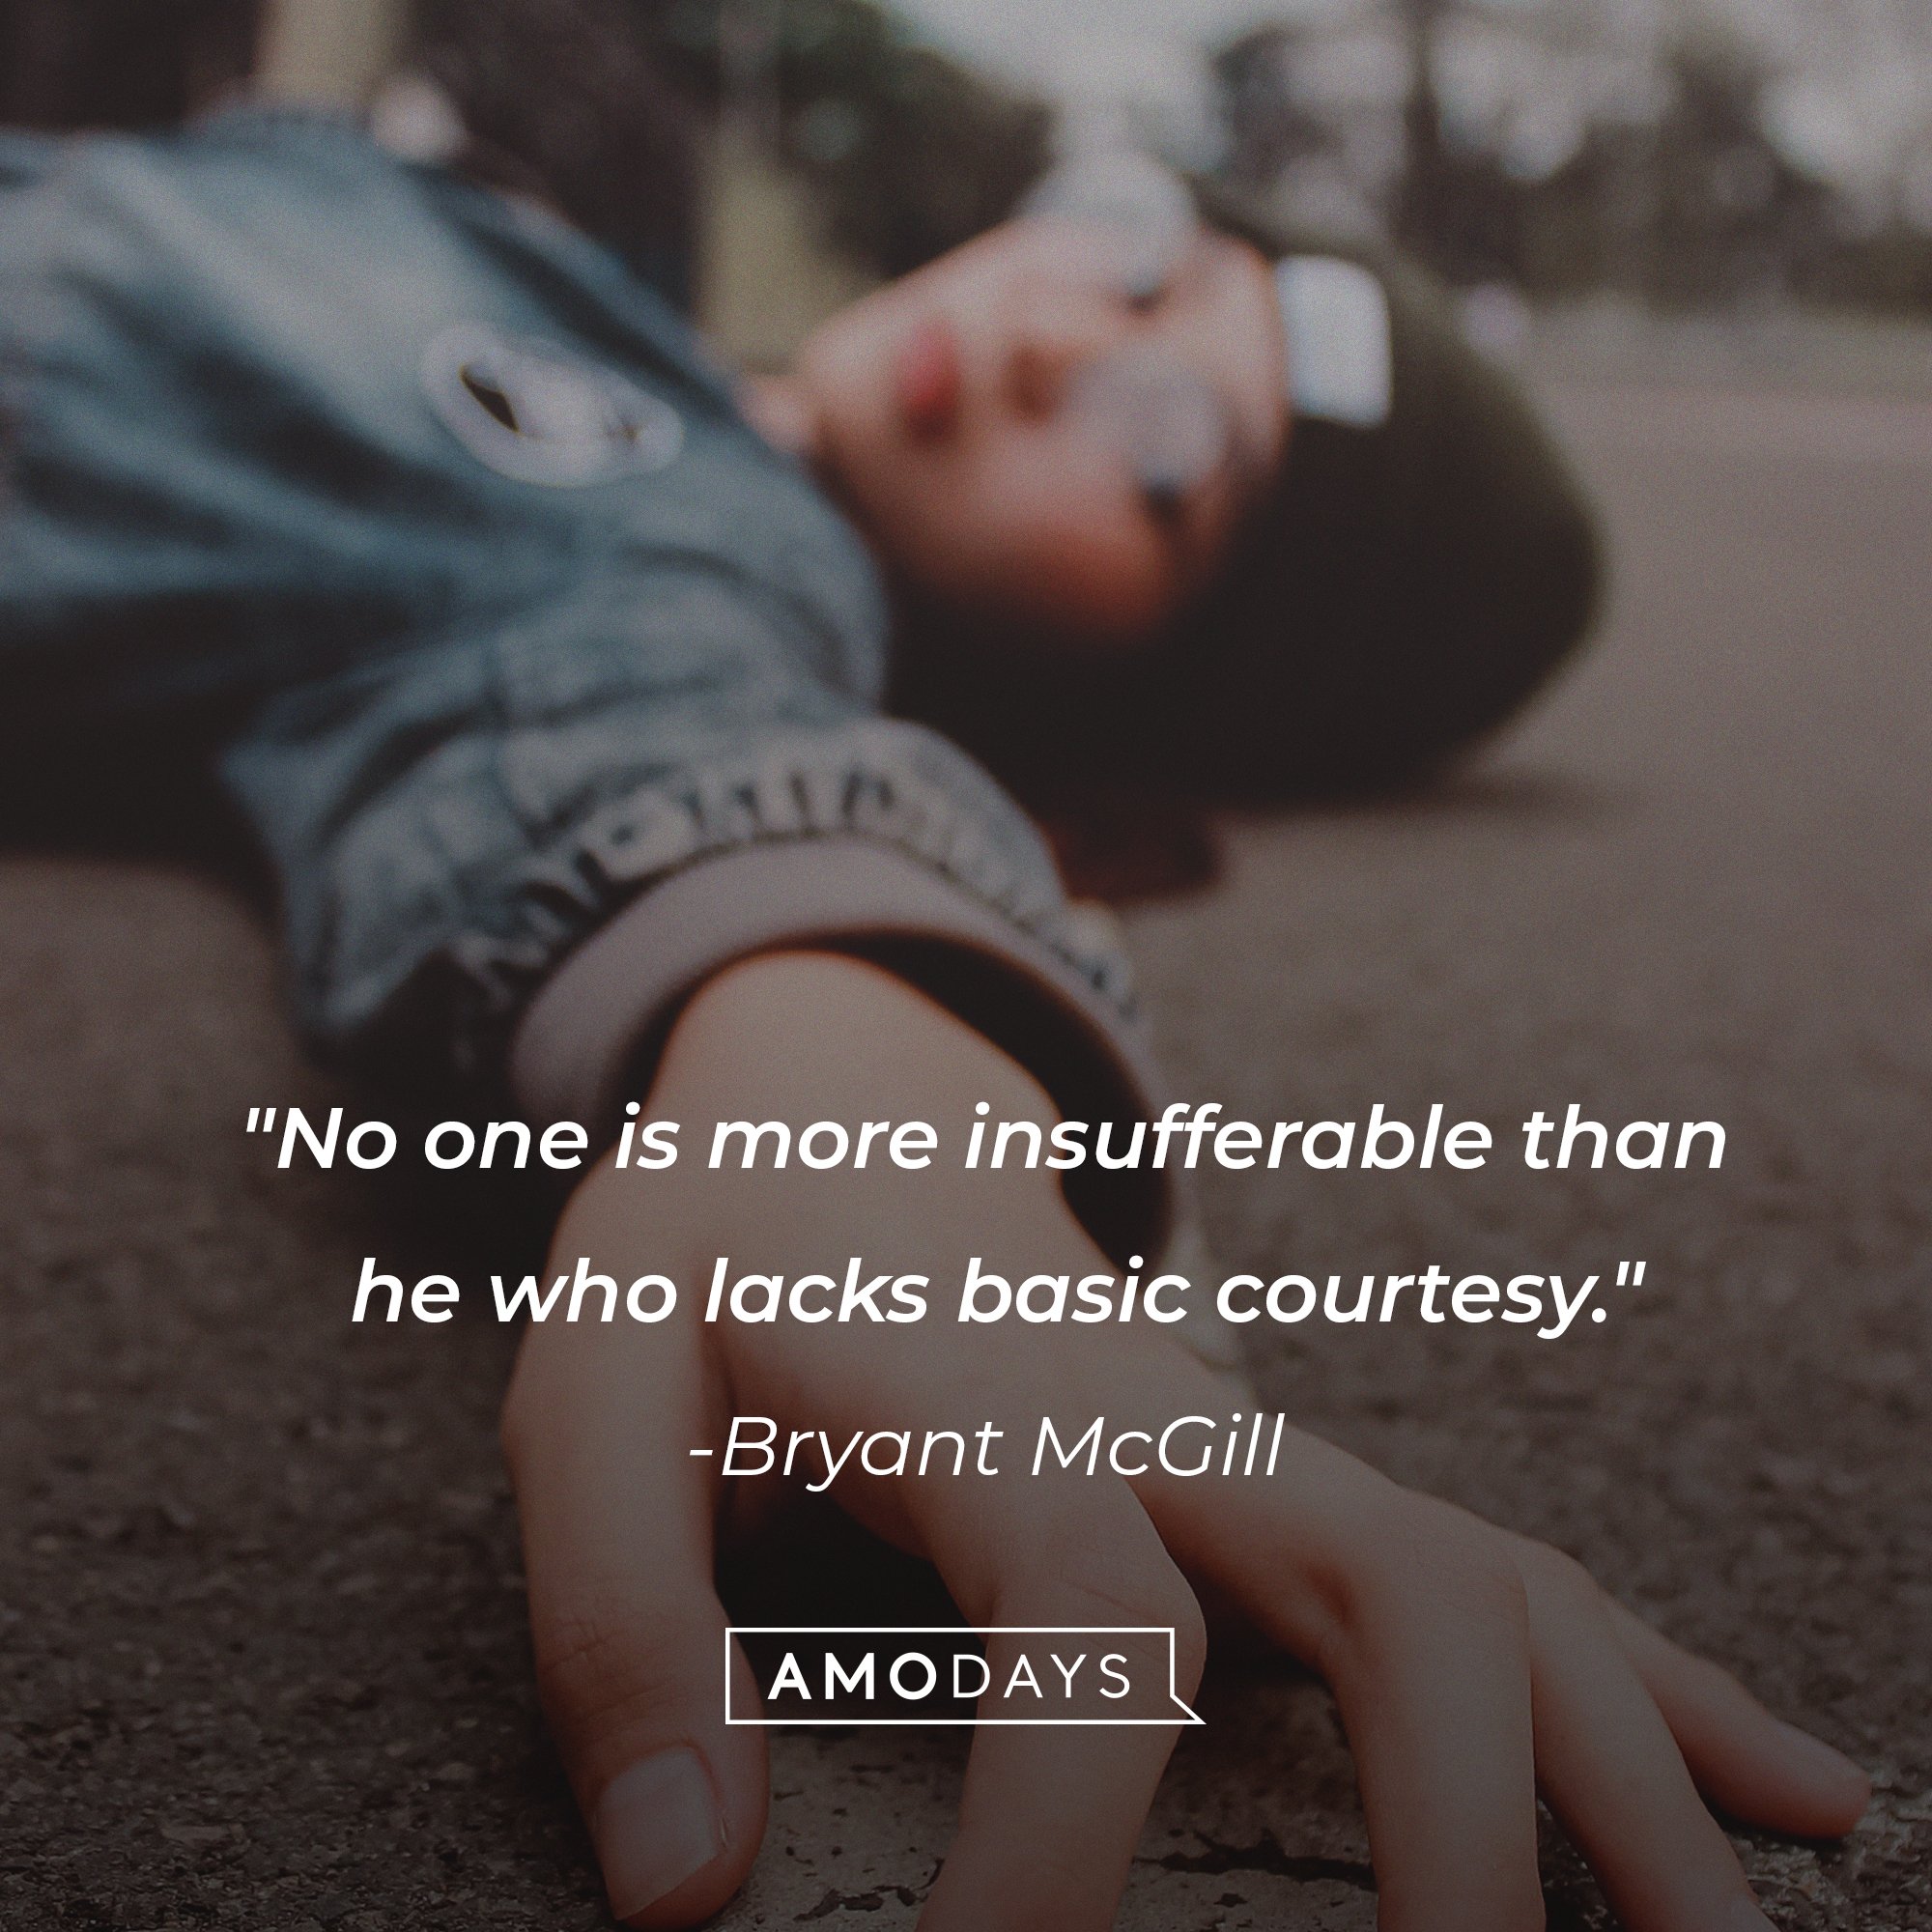  Bryant McGill’s quote: "No one is more insufferable than he who lacks basic courtesy." | Image: AmoDays